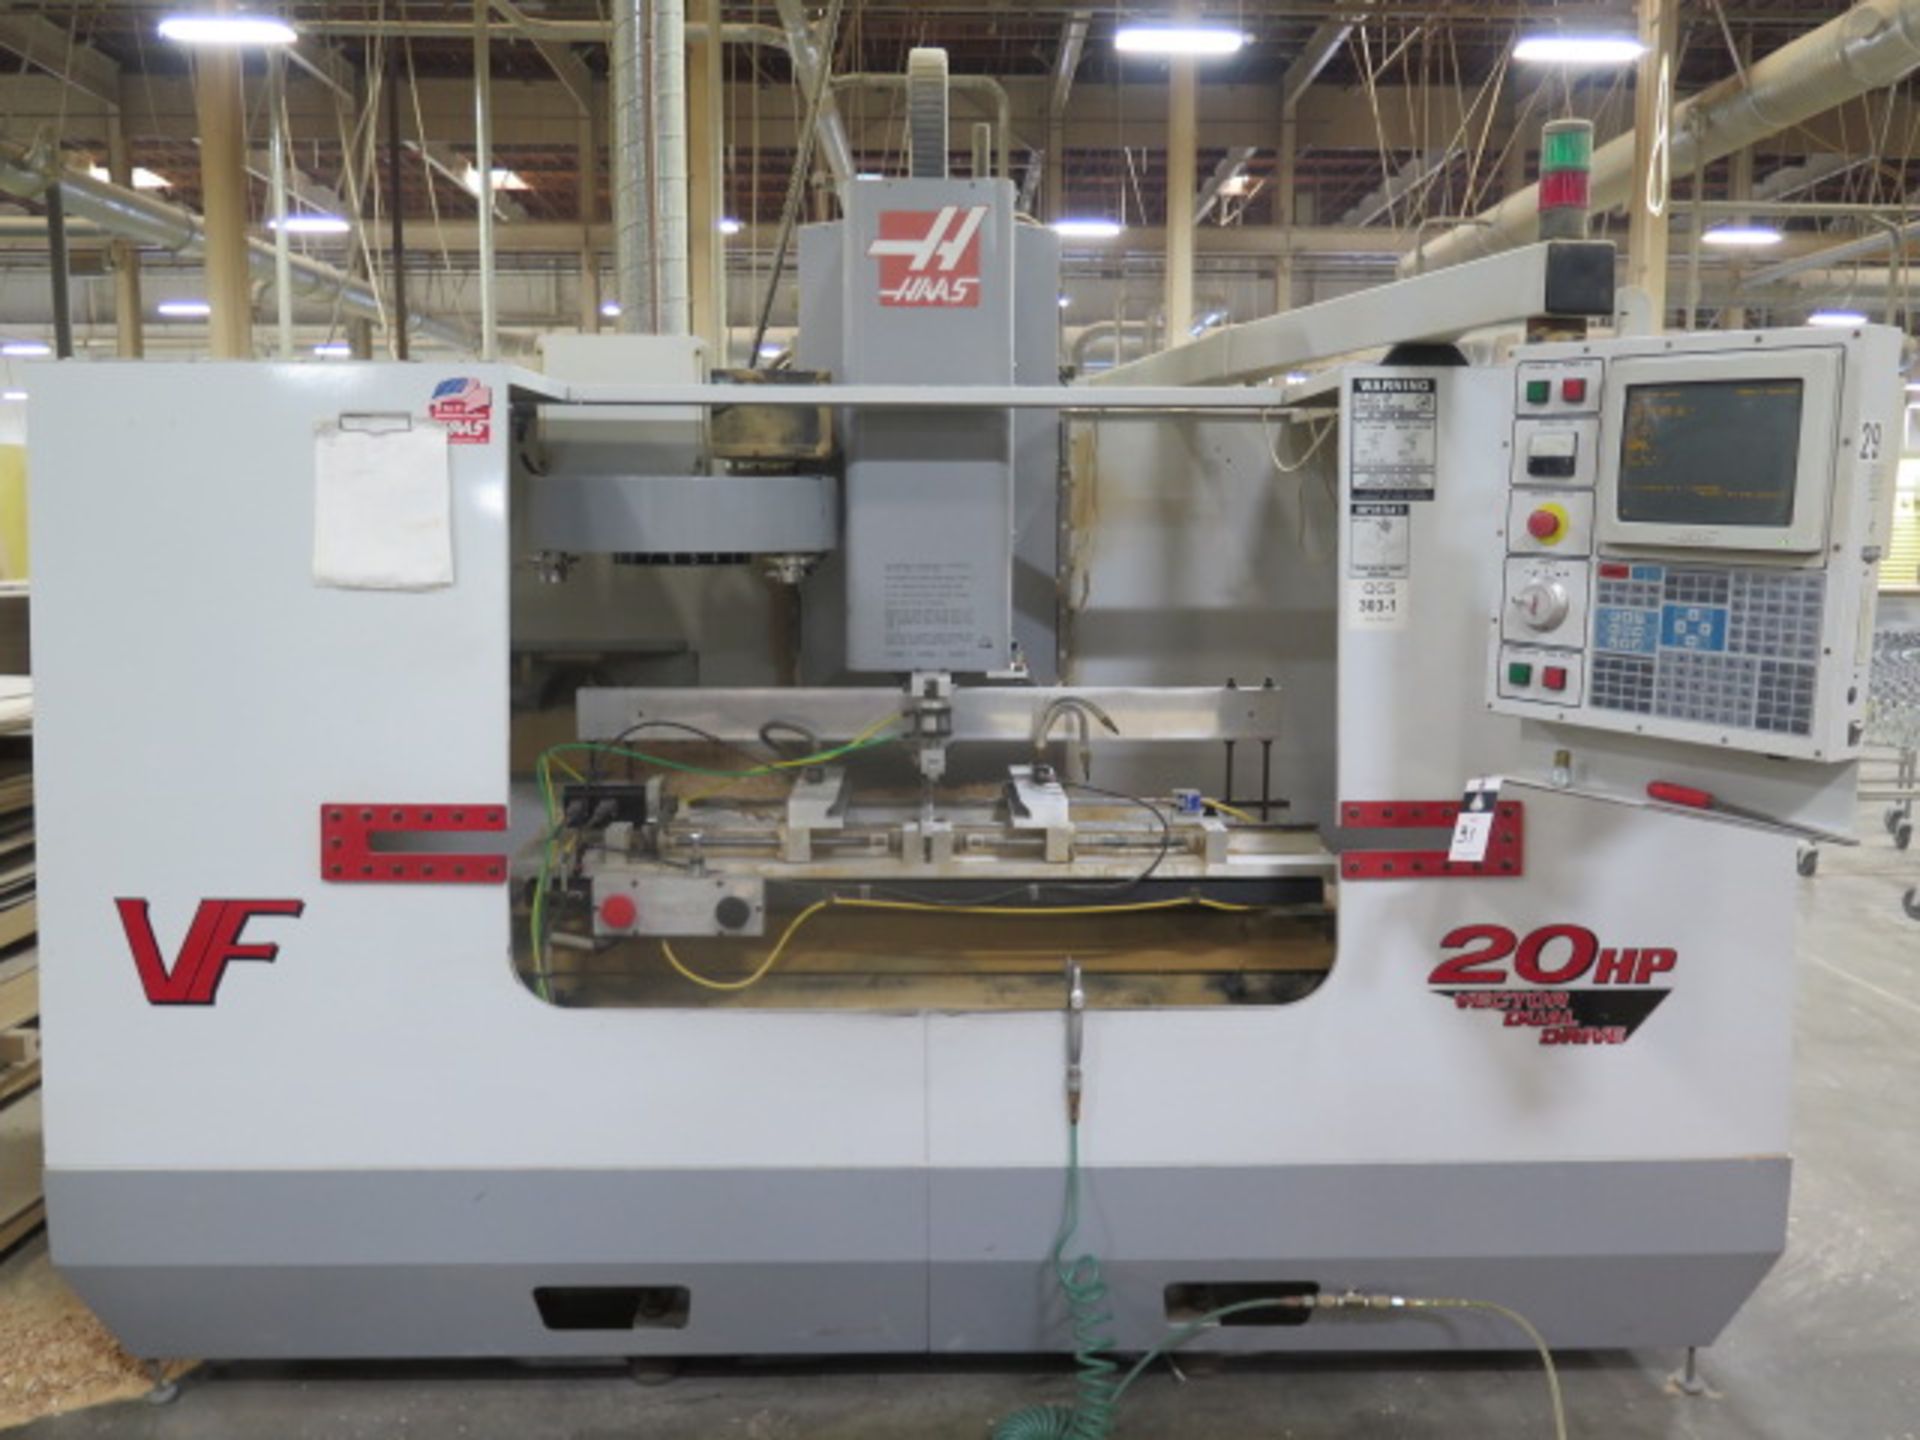 2000 Haas VF-3 CNC VMC s/n 19712 w/ Haas Controls, 20-Station ATC, CAT-40,NO COOLER TANK, SOLD AS IS